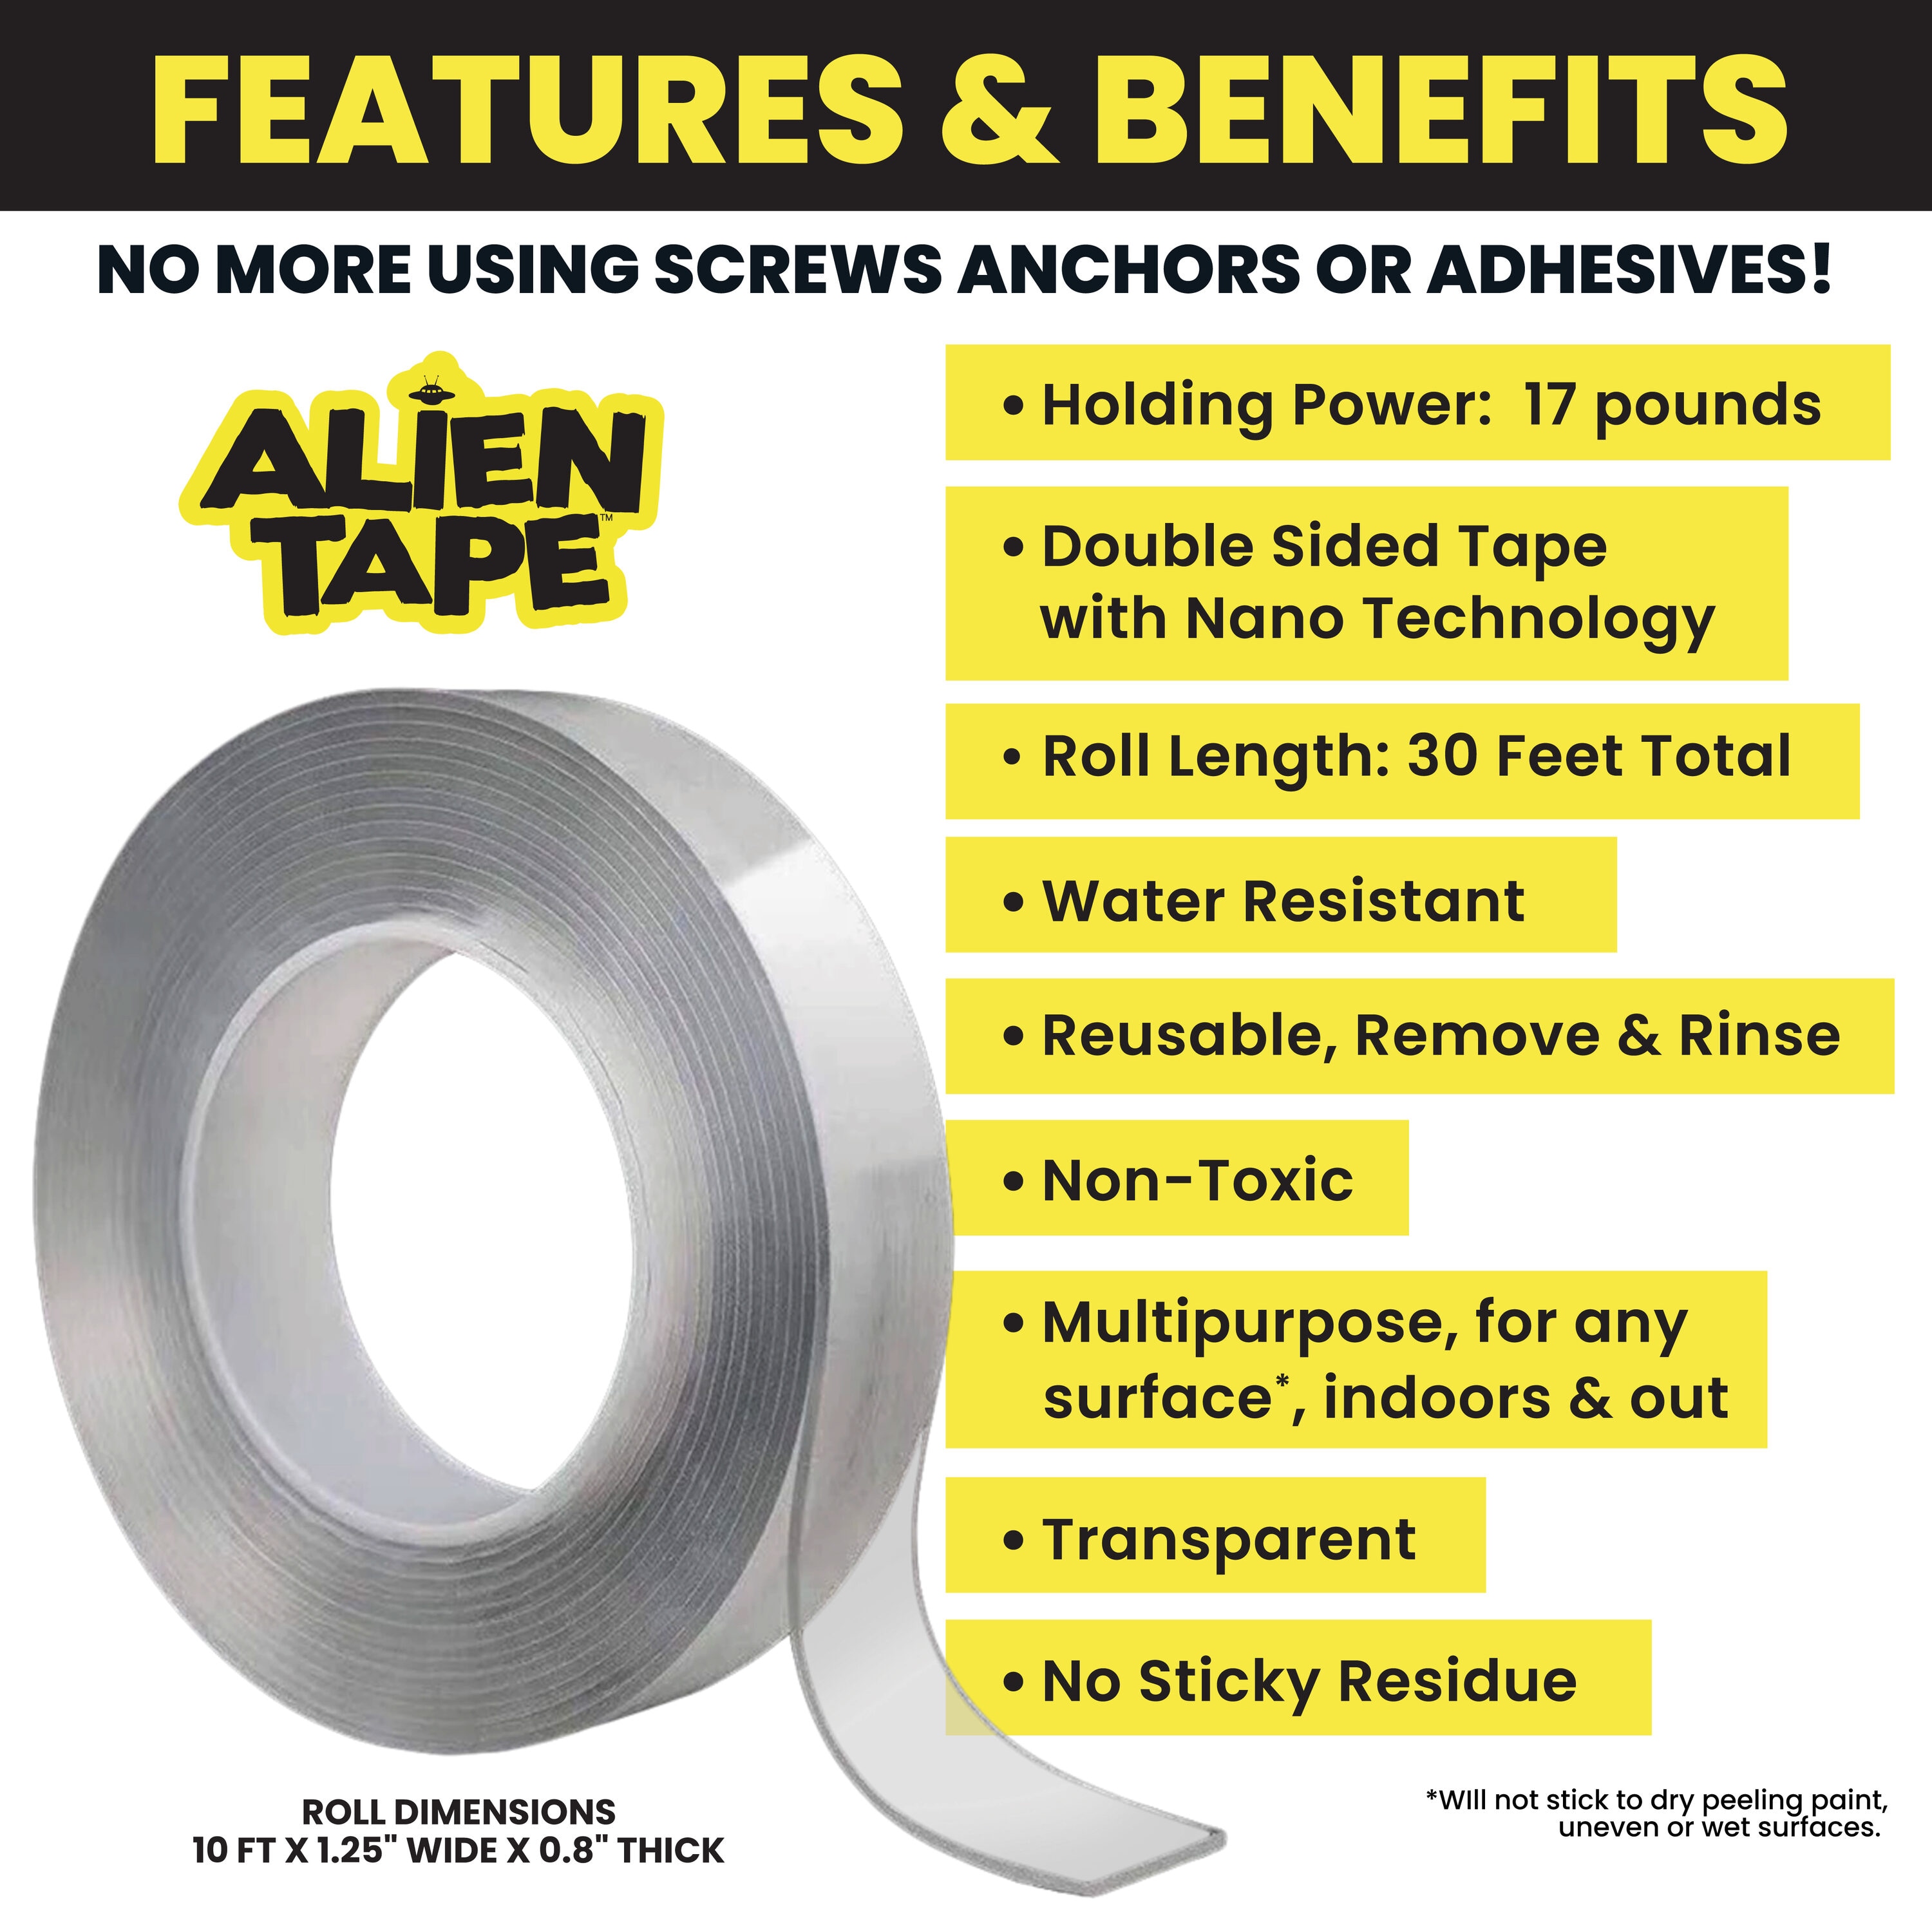 Alien Tape™ 10' Clear Multifunctional Reusable Double-Sided Tape - 3 Pack  at Menards®